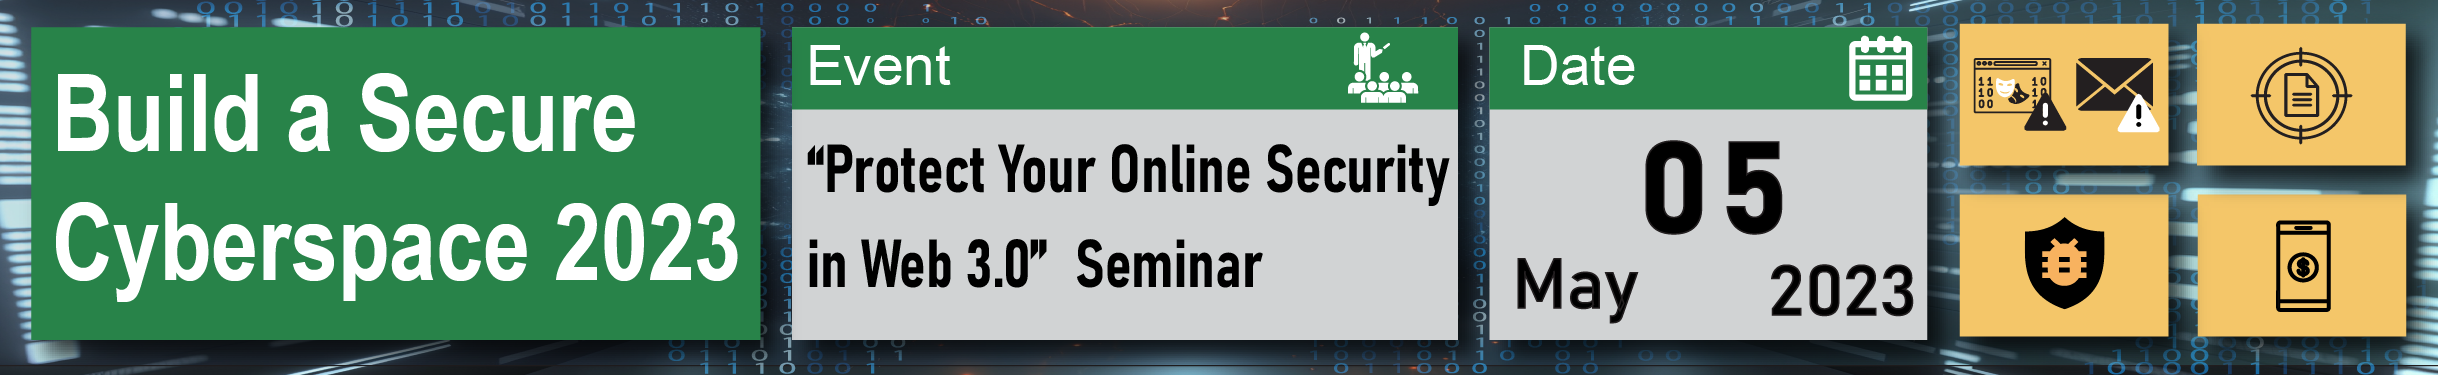 Build a Secure Cyberspace 2023 - “Protect Your Online Security in Web 3.0” Seminar